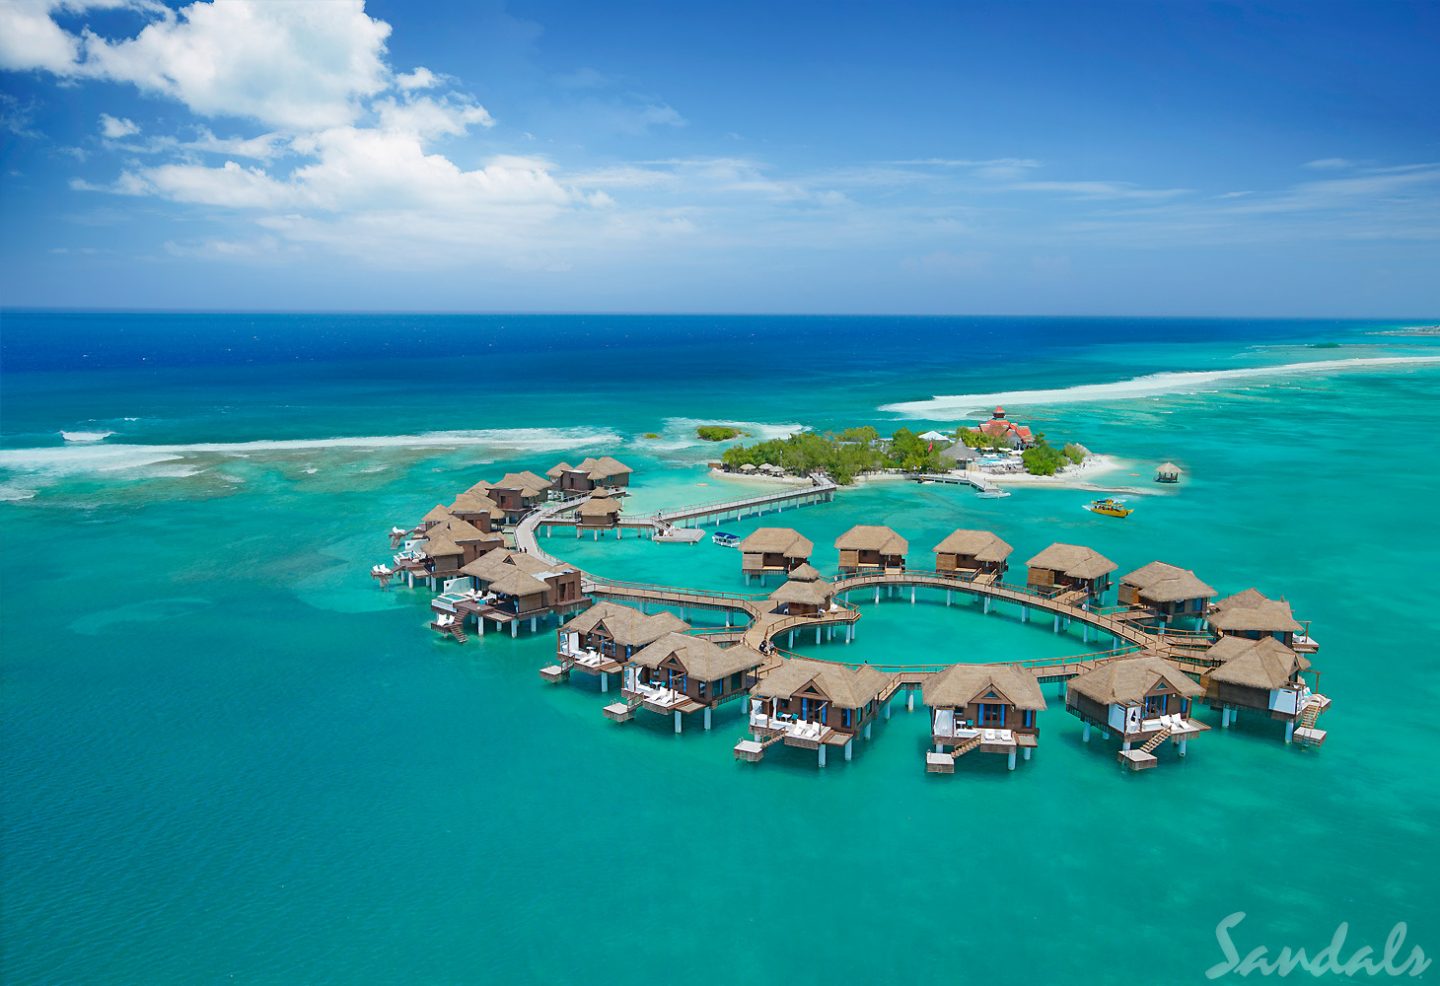 The Best Overwater Bungalows Close To The USA | KeiKei Travels